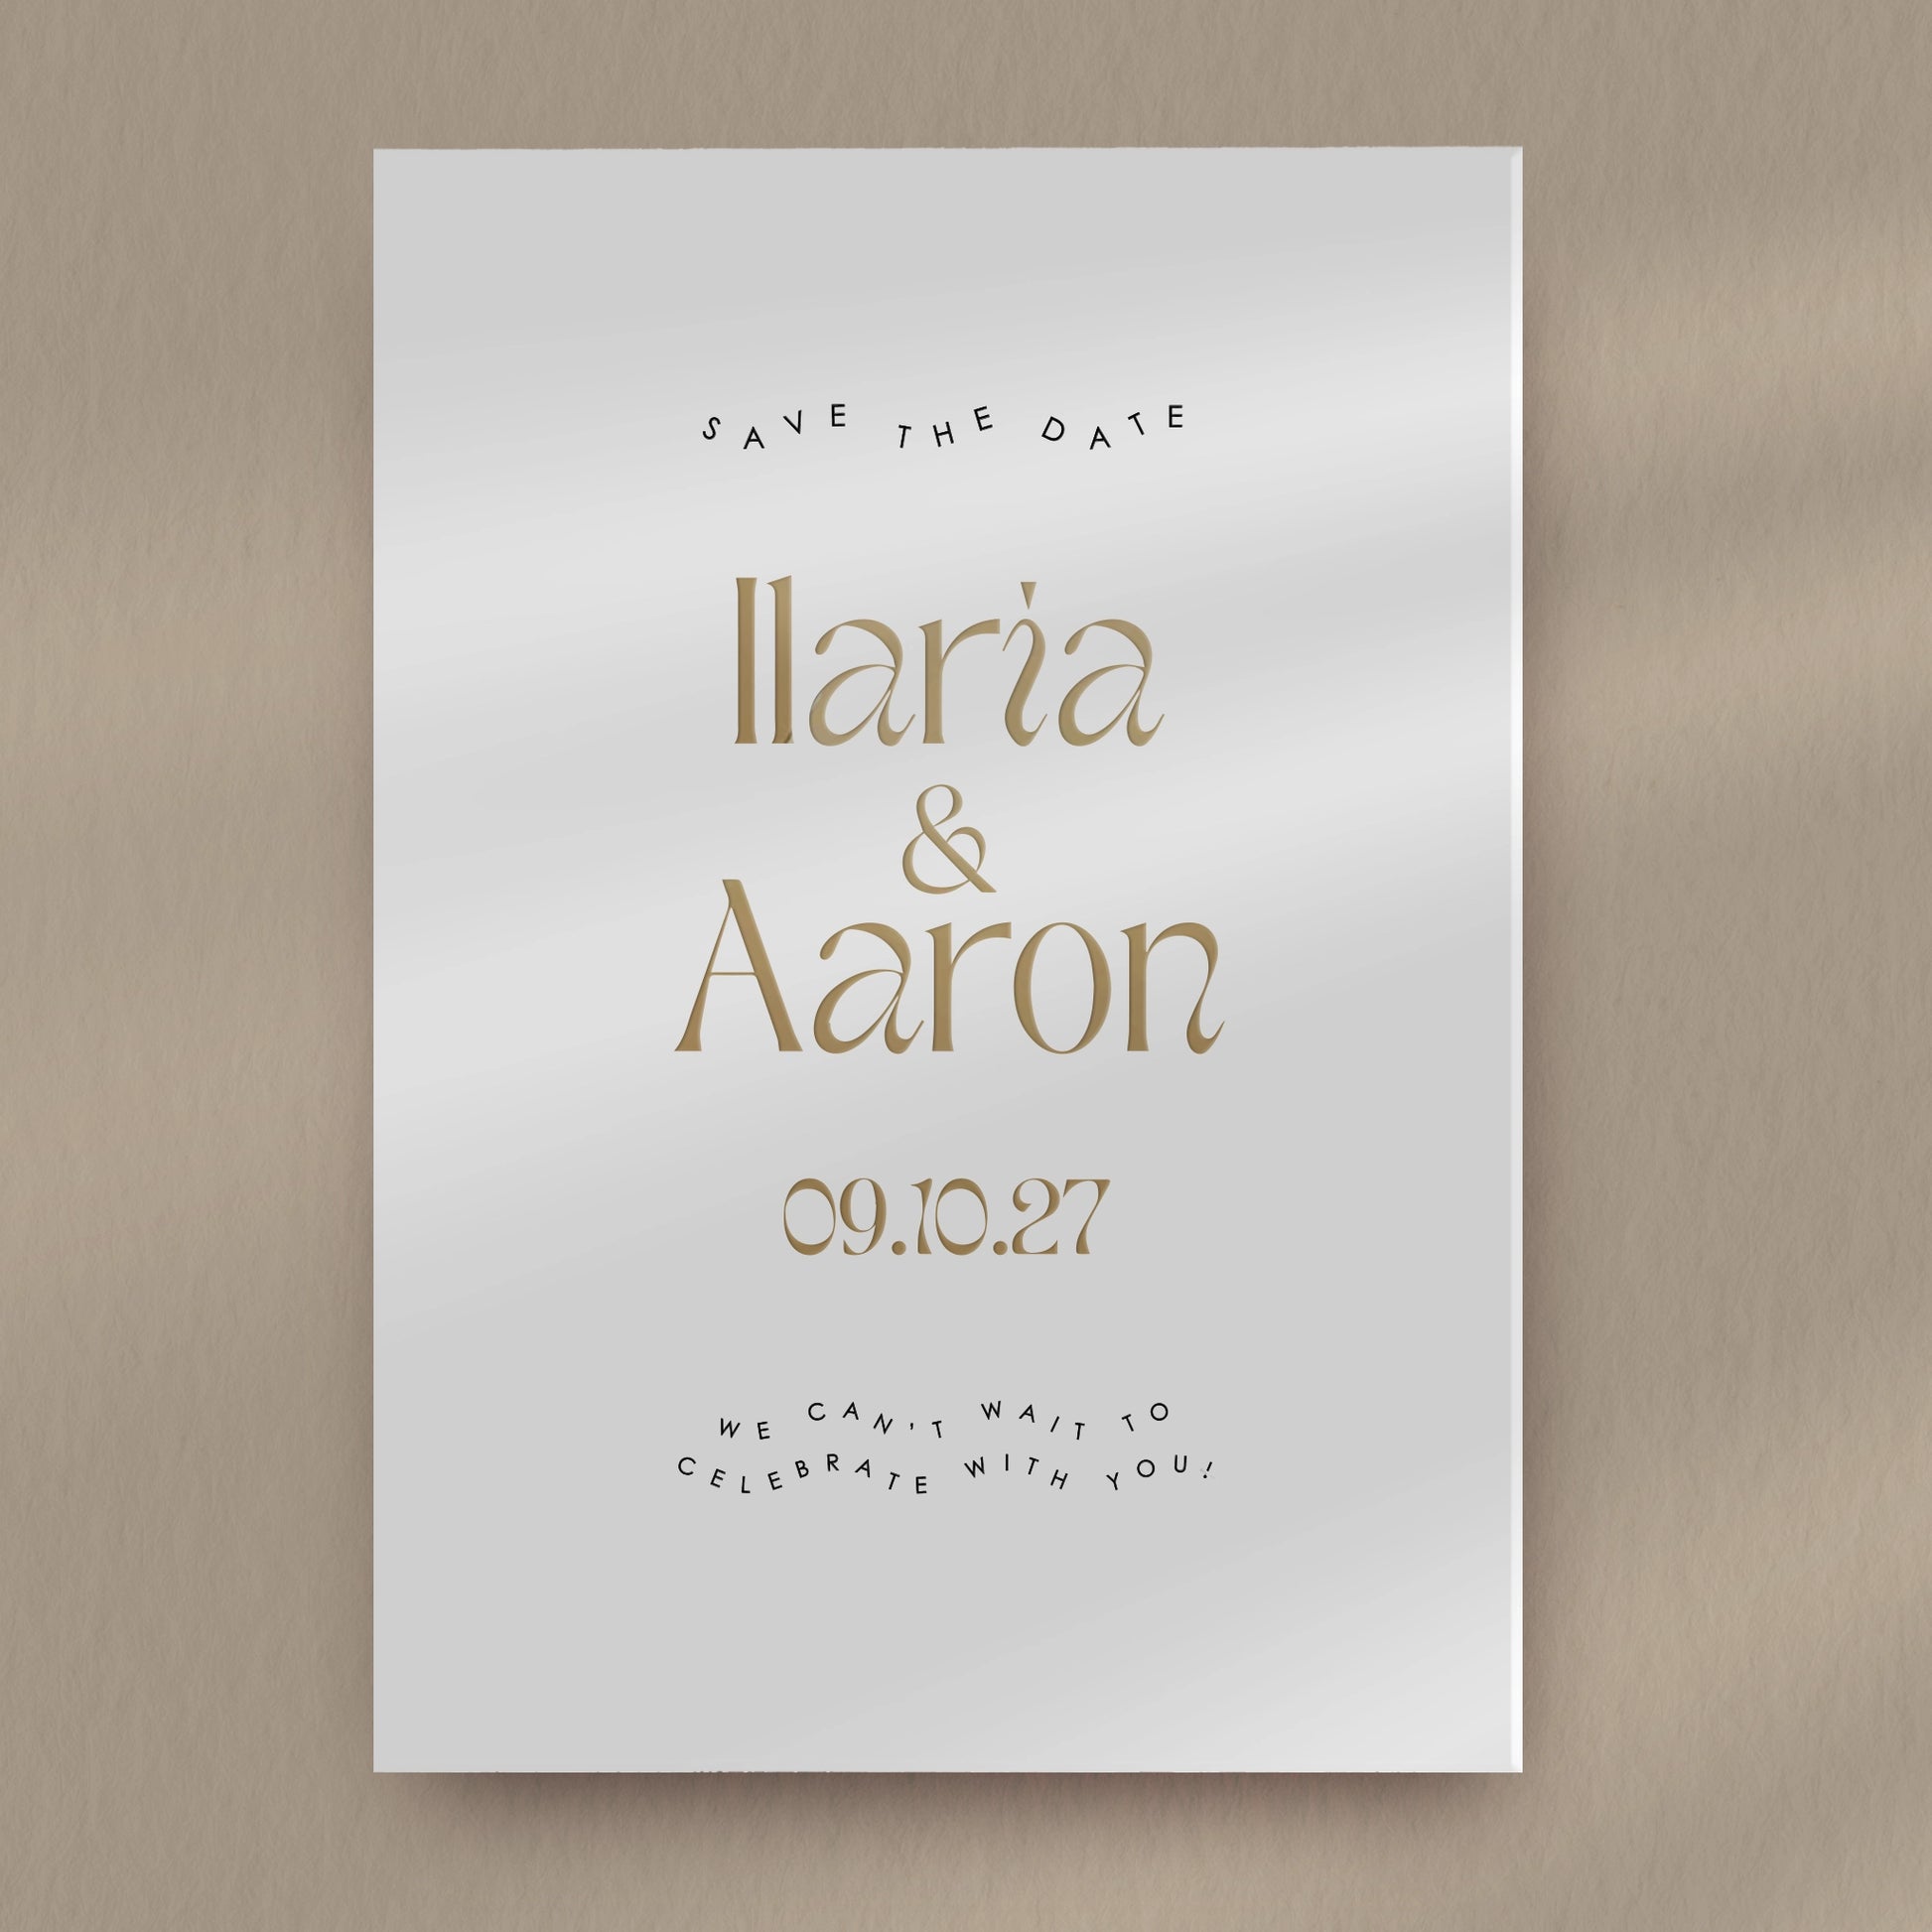 Save The Date Sample  Ivy and Gold Wedding Stationery Ilaria  